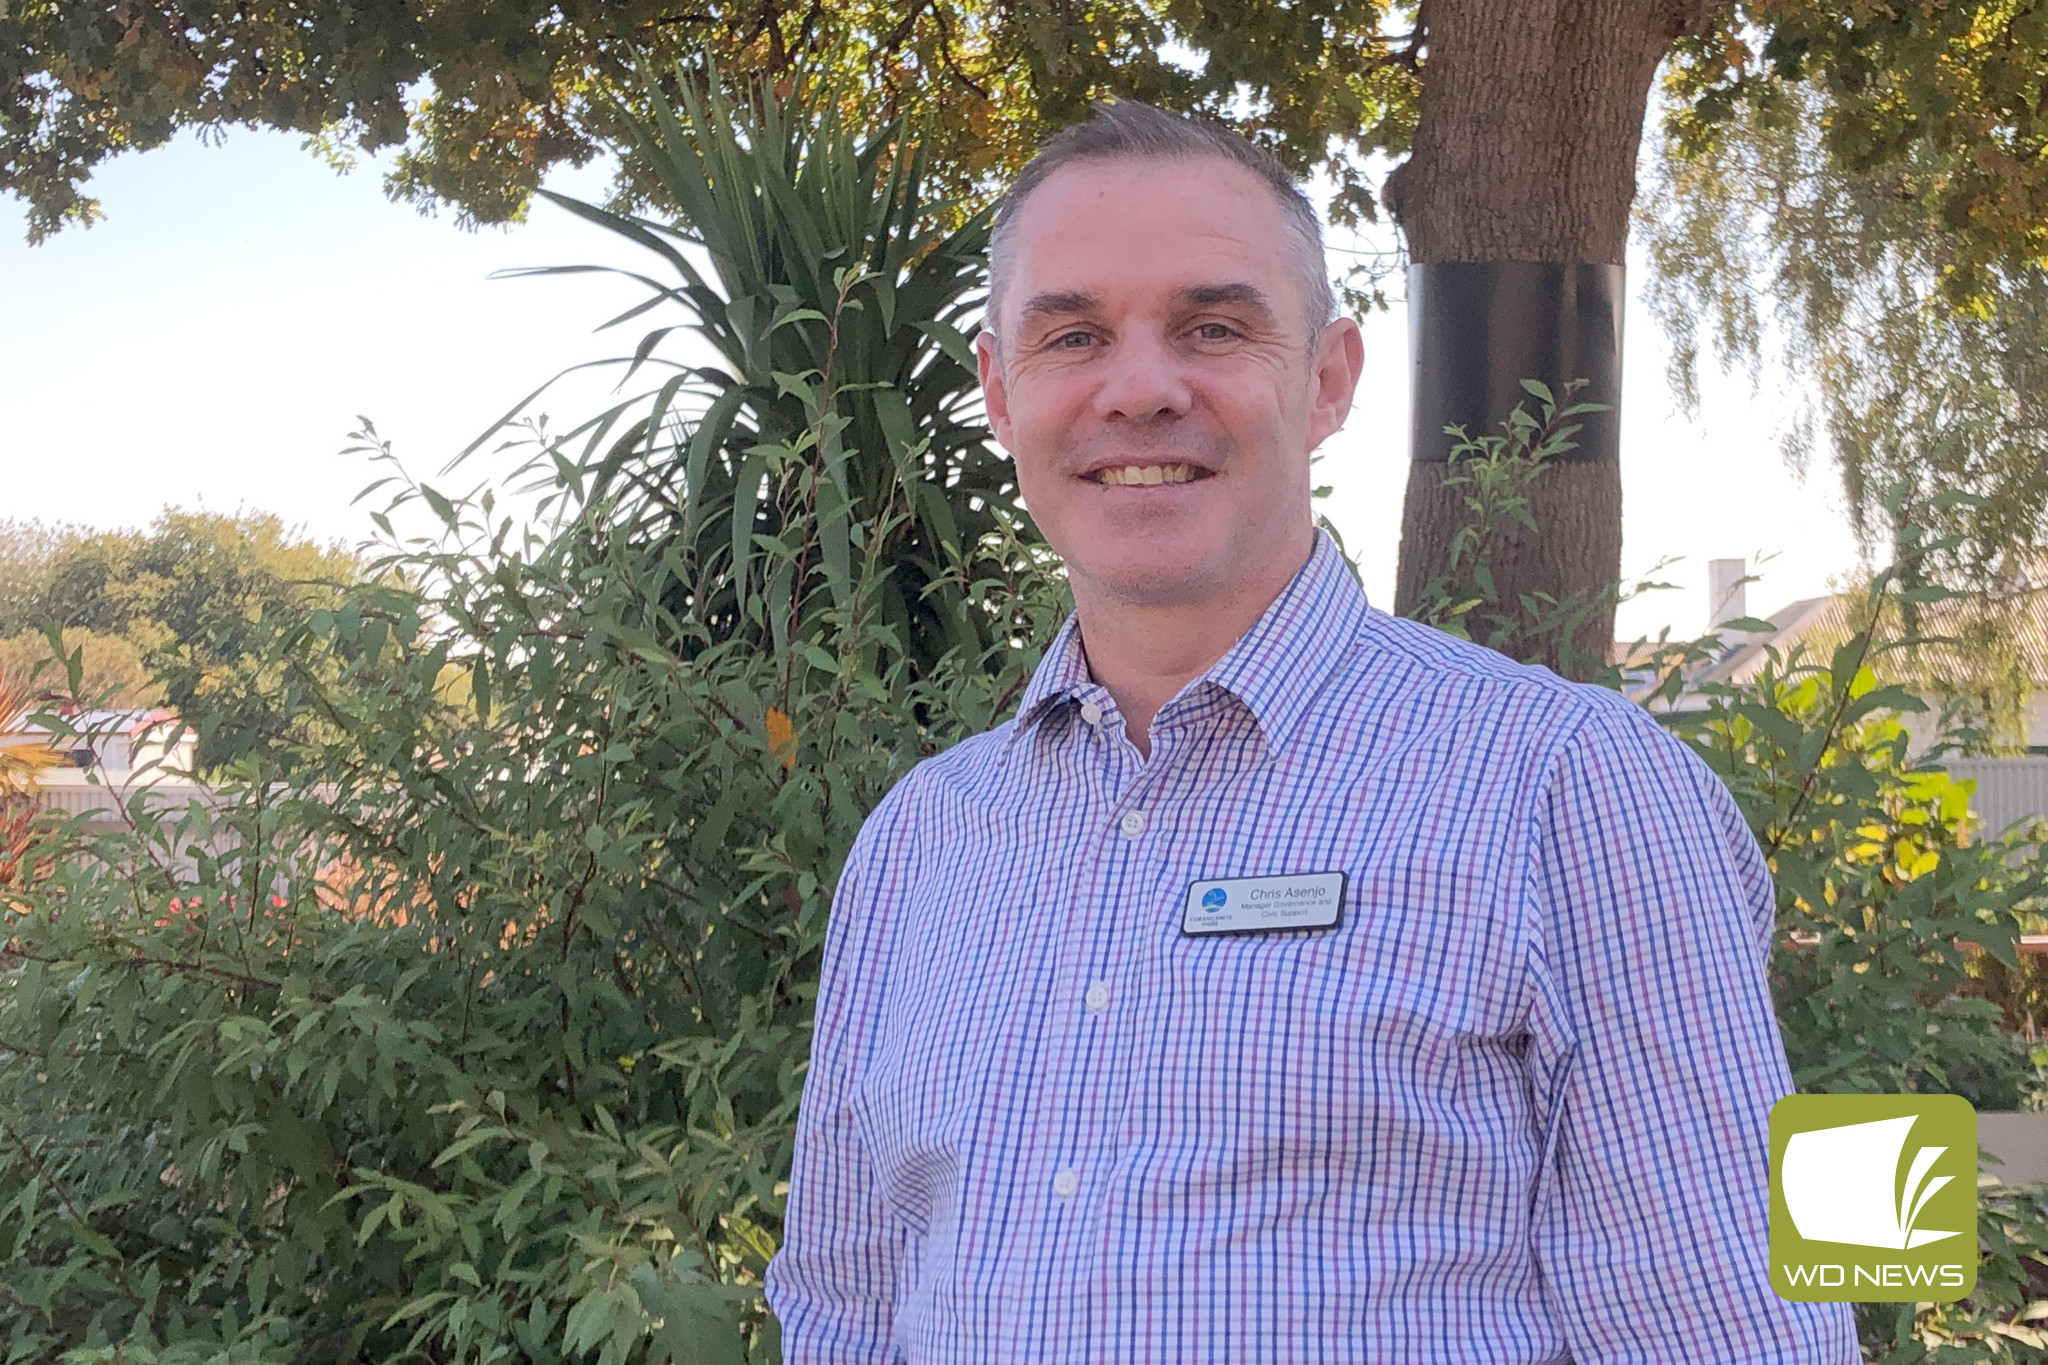 Warm welcome: Corangamite Shire Council has welcomed Chris Asenjo as the new manager governance and civic support.